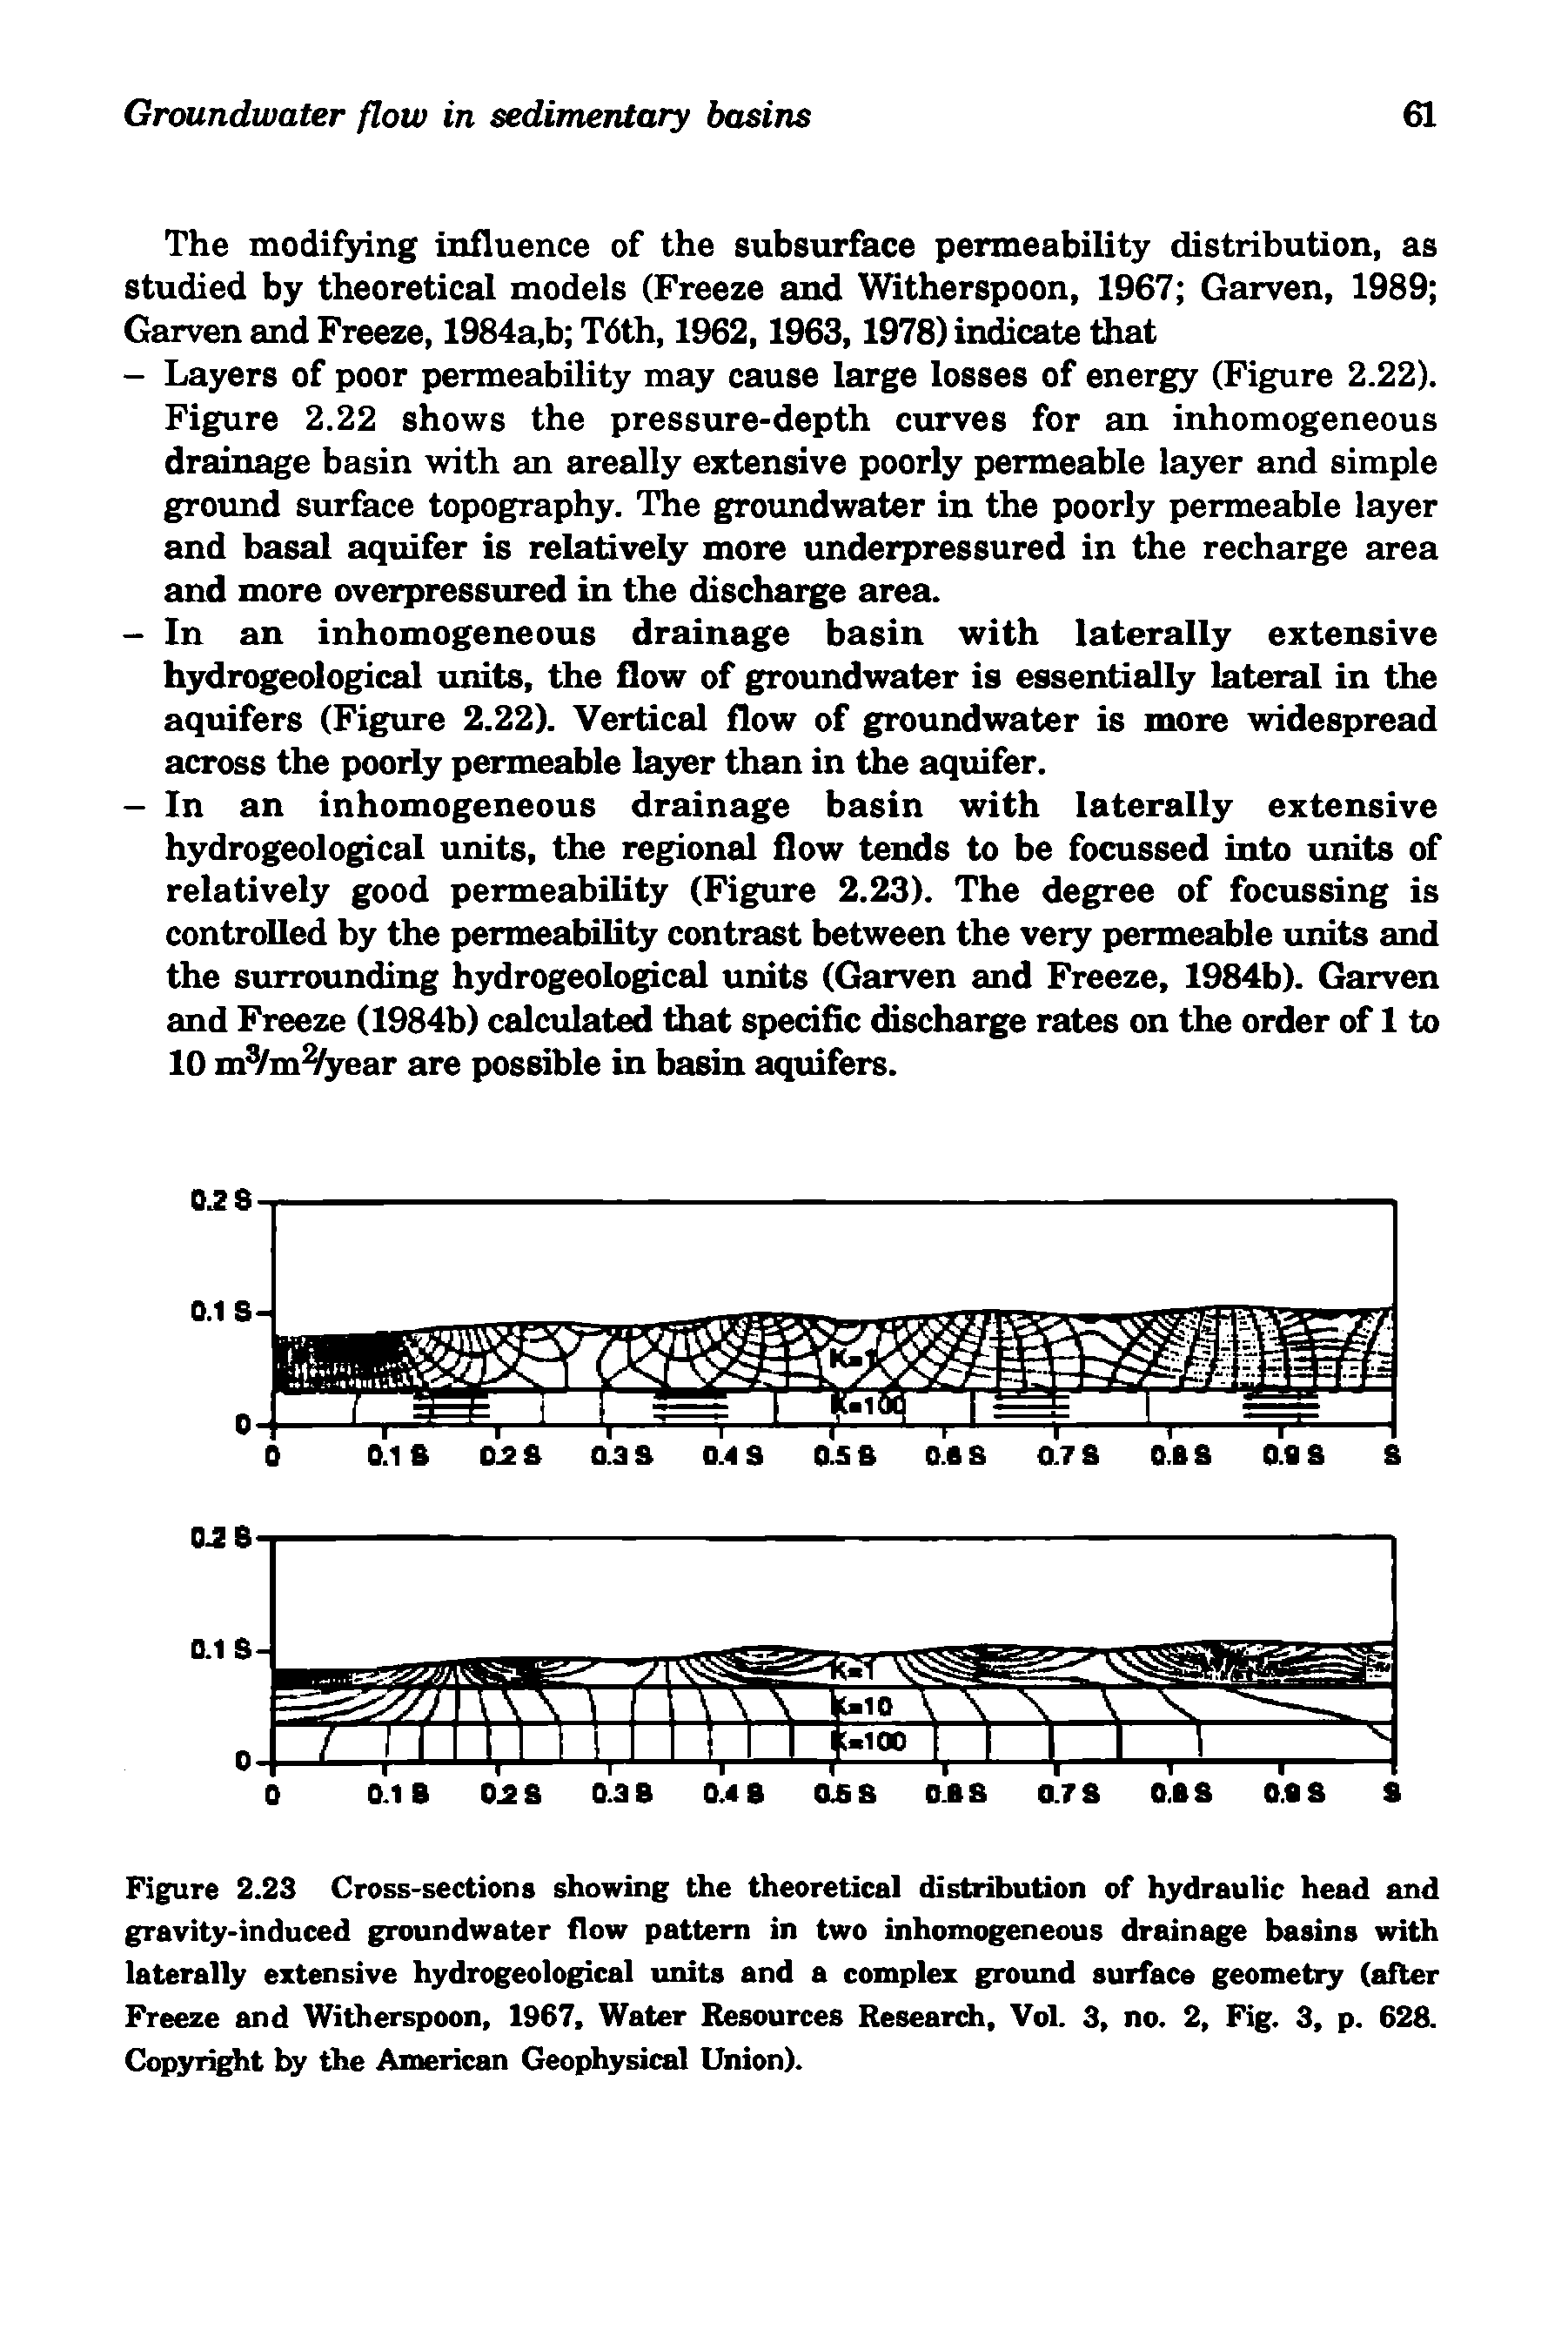 Figure 2.23 Cross-sections showing the theoretical distribution of hydraulic head and gravity-induced groundwater flow pattern in two inhomogeneous drainage basins with laterally extensive hydrogeological units and a complex ground surface geometry (after Freeze and Witherspoon, 1967, Water Resources Researdi, Vol. 3, no. 2, Fig. 3, p. 628. Copyright by the American Geophysical Union).